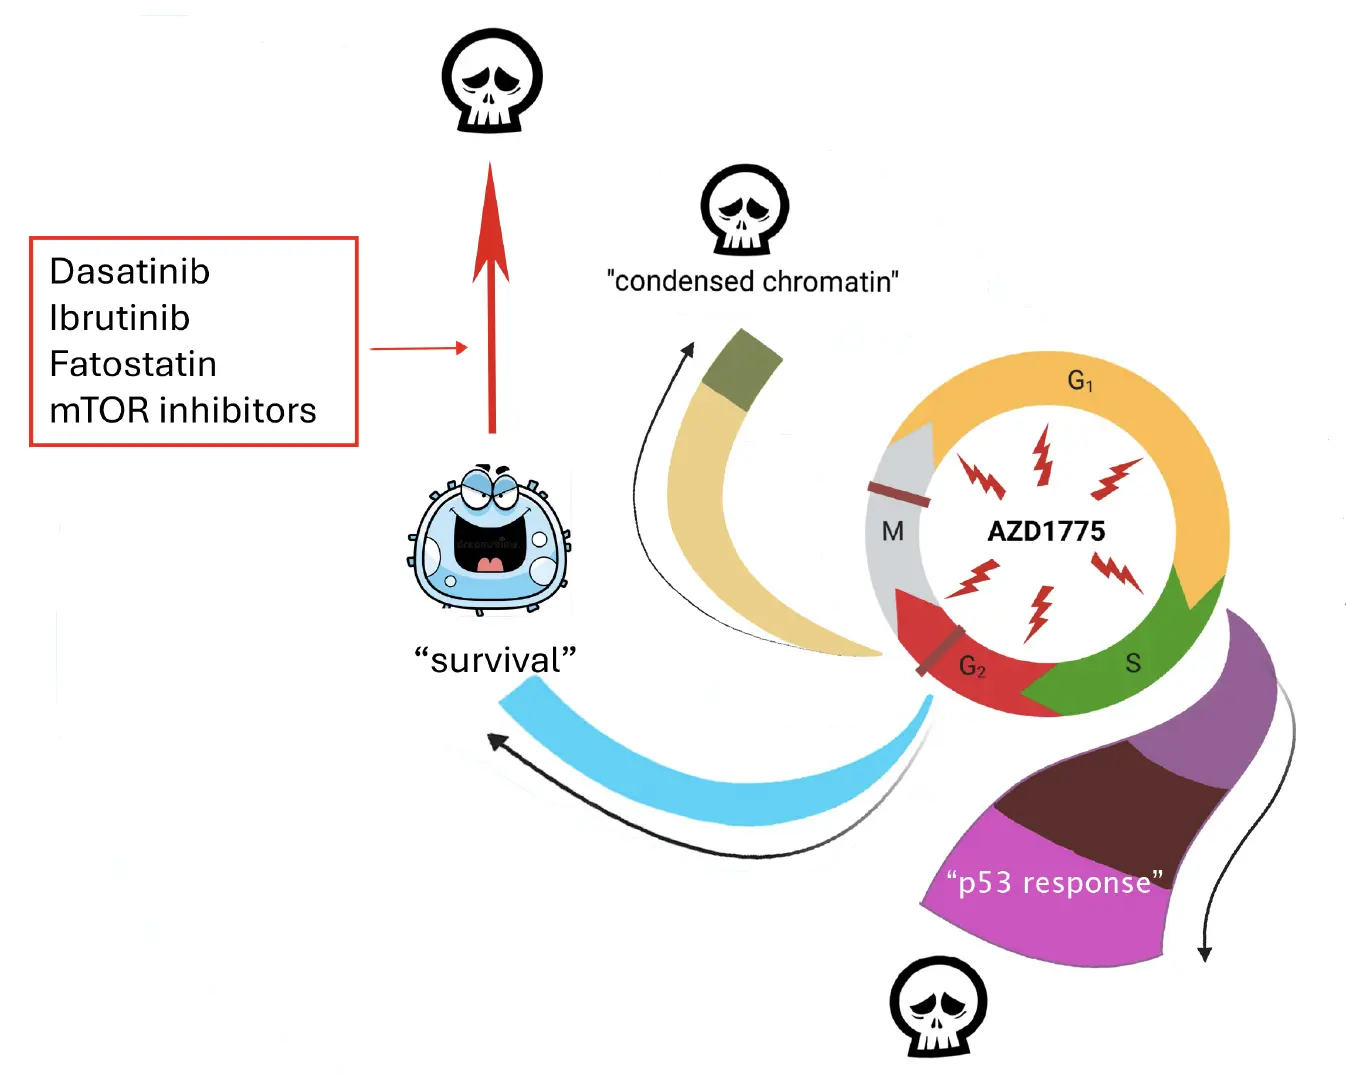 The image features a diagram that illustrates the impact of various inhibitors on the cell cycle.